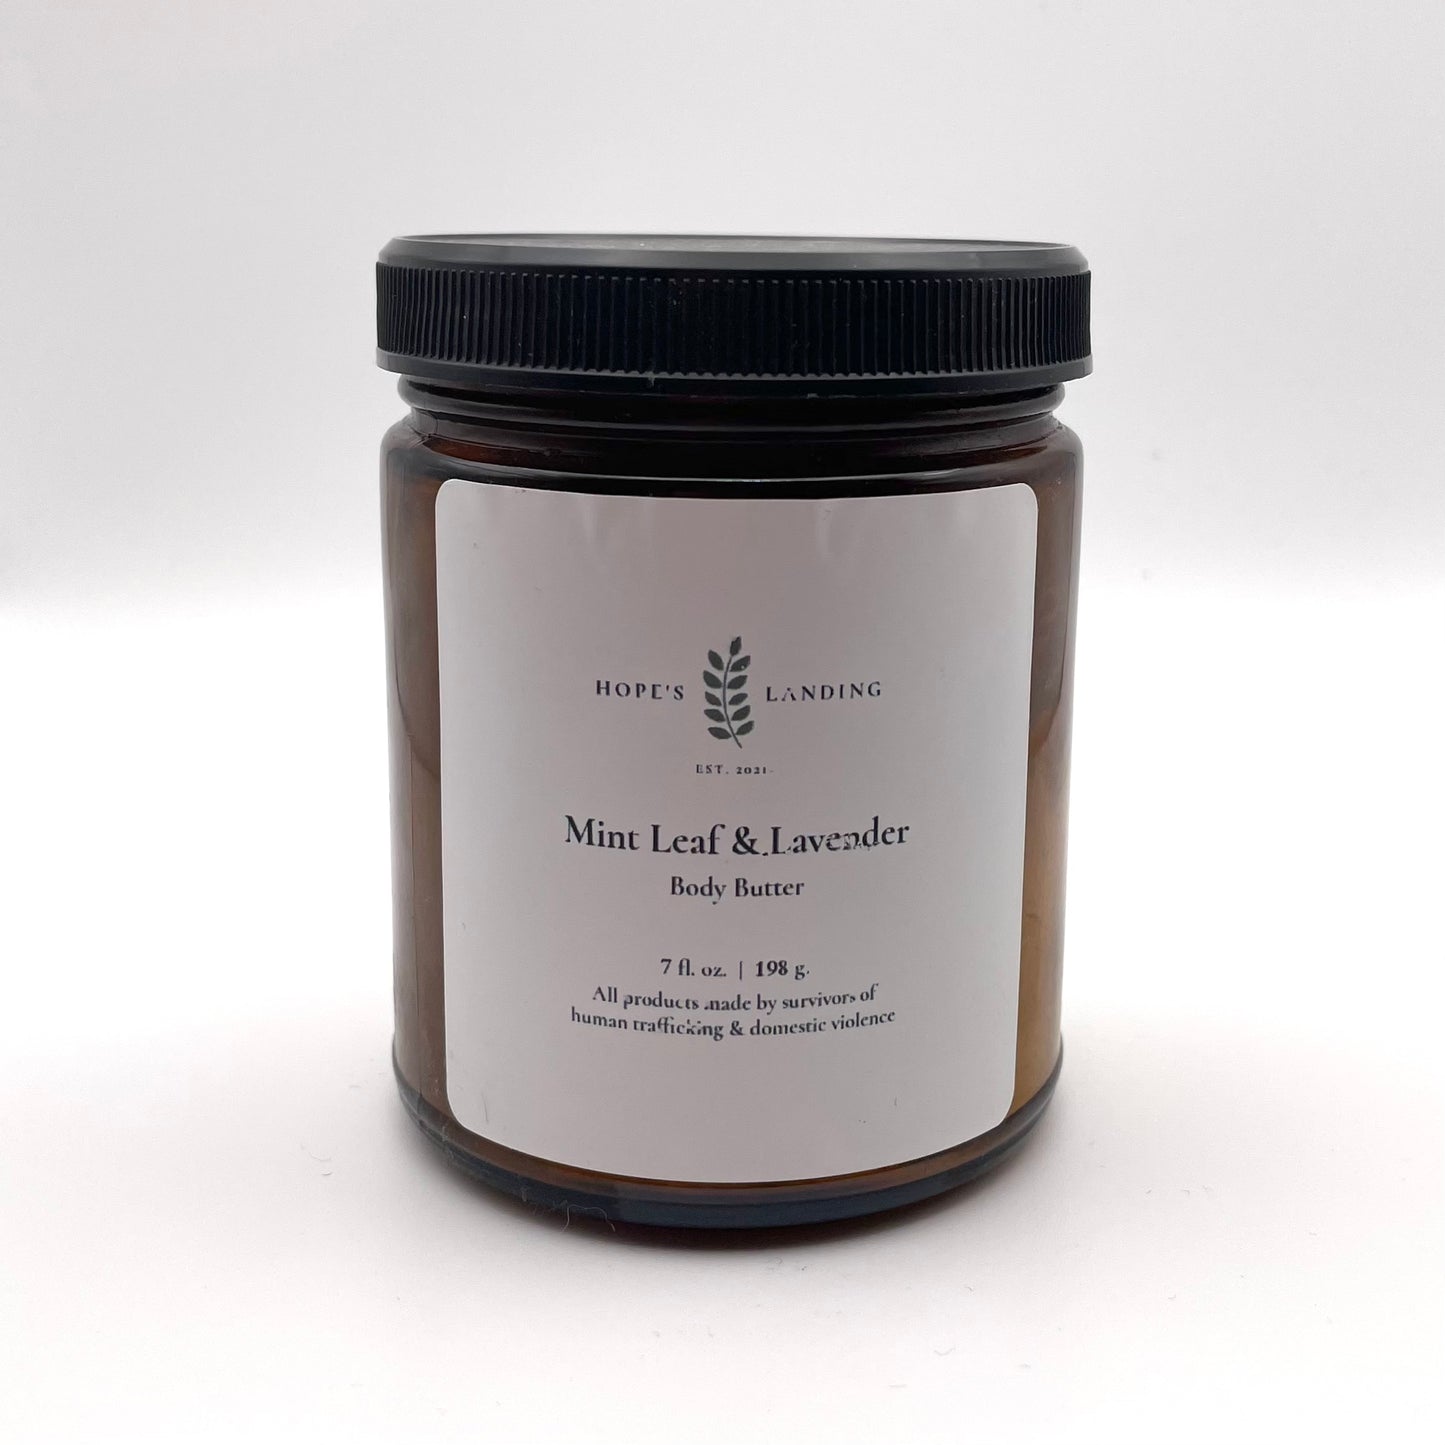 Body Butter - Multiple Scents Available